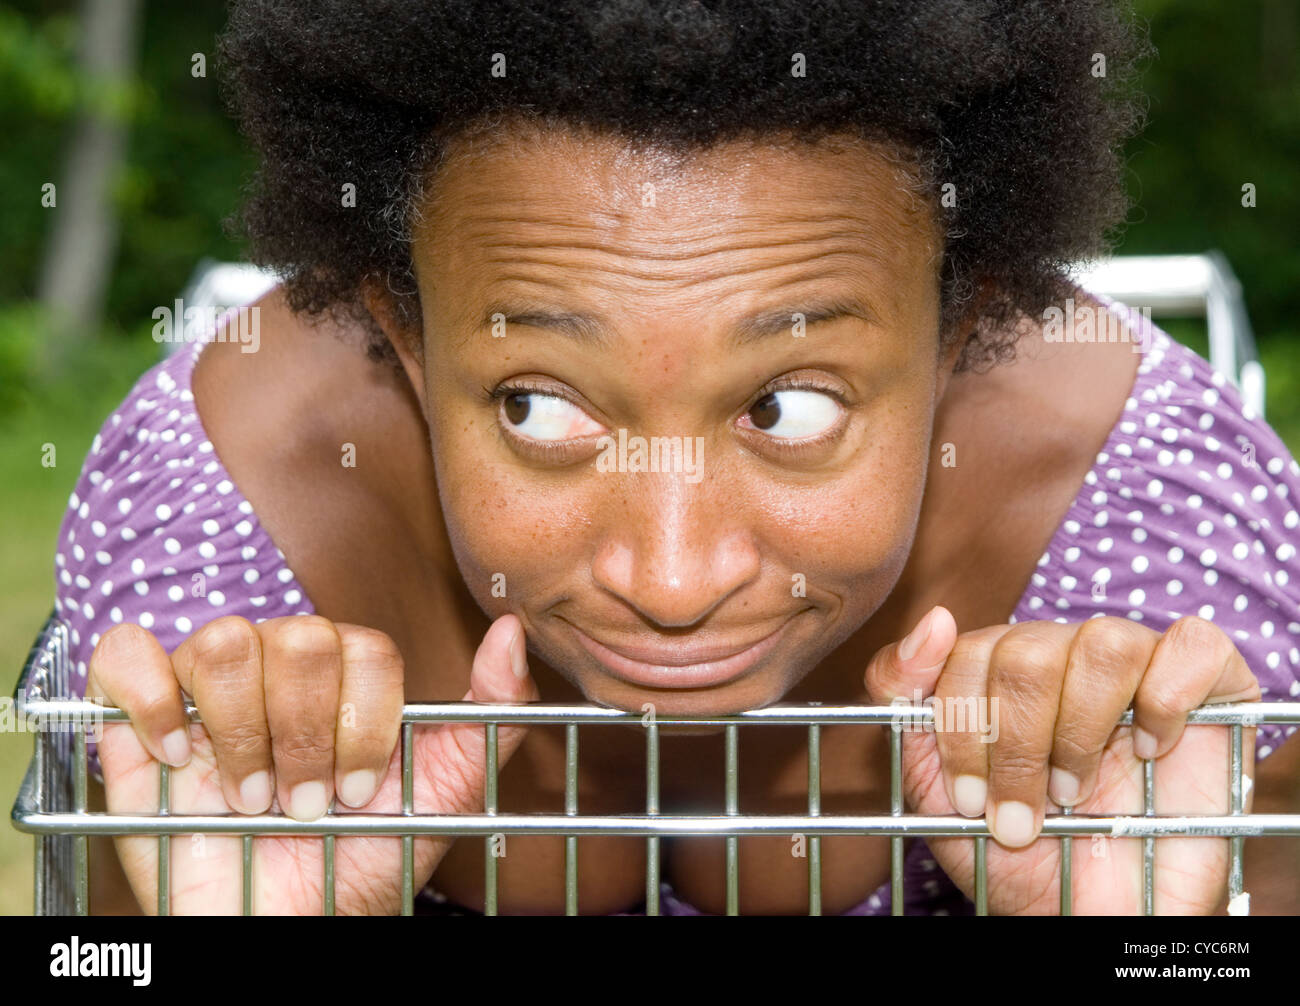 Closeup of African American woman with an afro in a grocery cart making a comic face Stock Photo